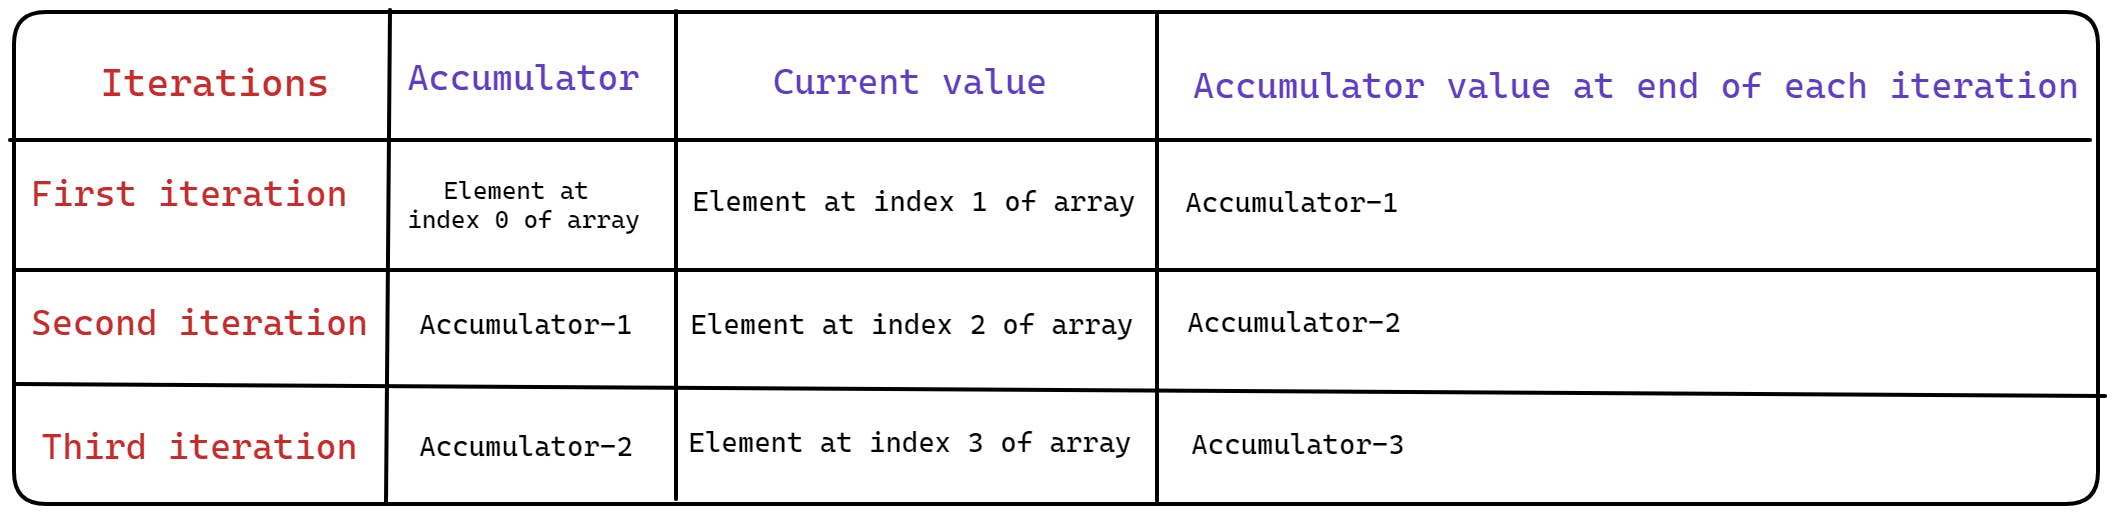 diagram explaining how current value and accumulator changes during each iteration when initial value is not present